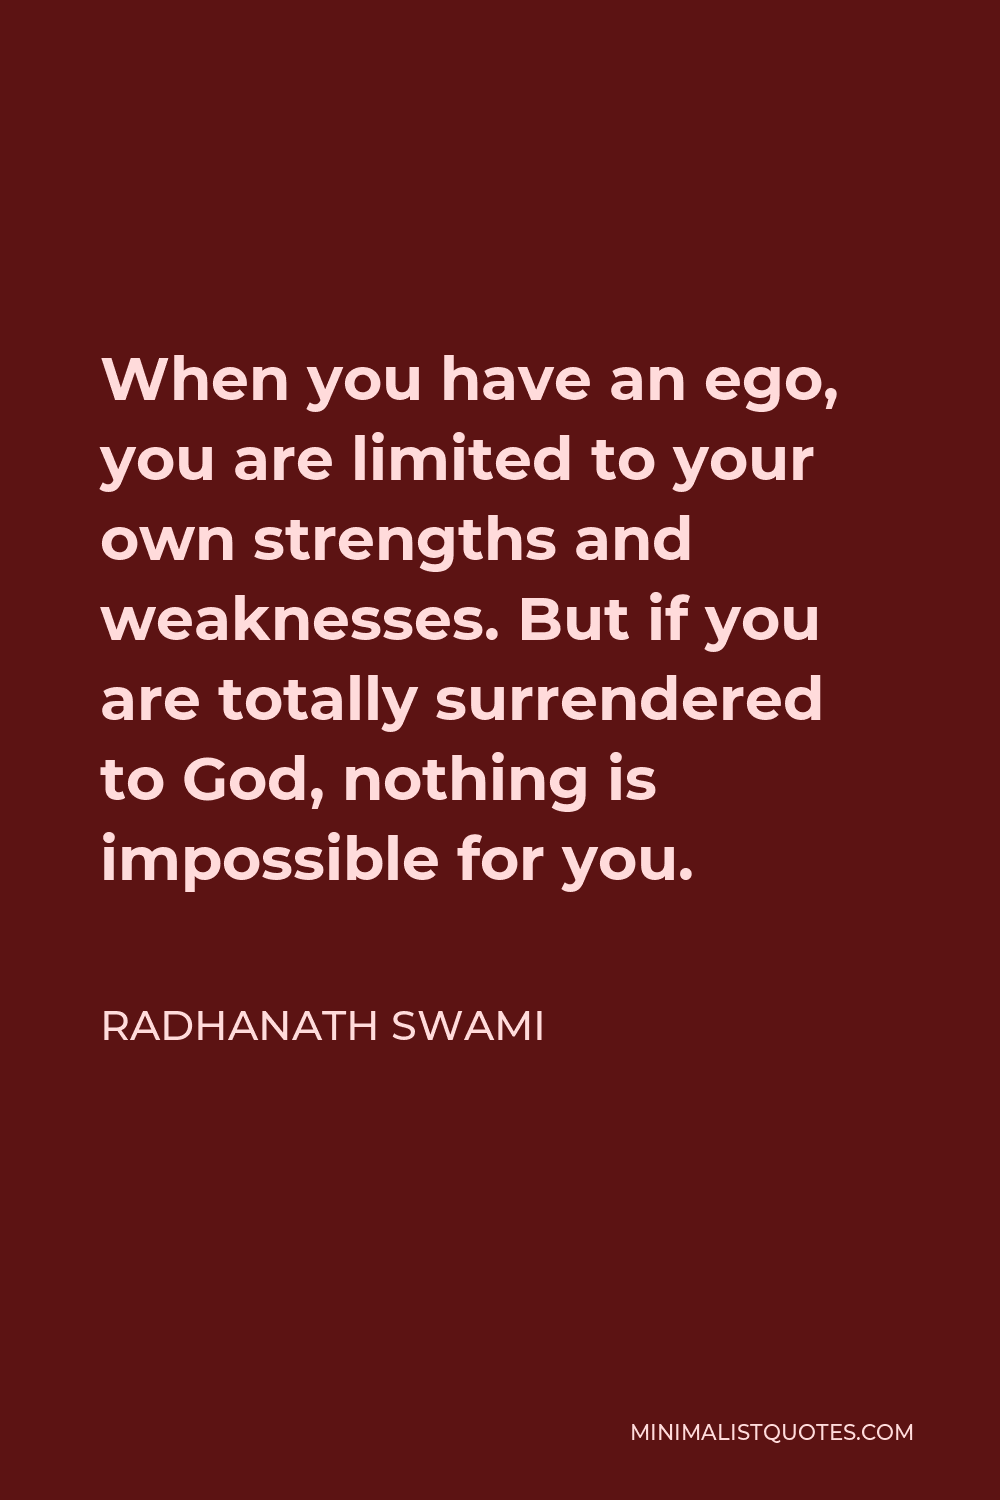 Radhanath Swami Quote - When you have an ego, you are limited to your own strengths and weaknesses. But if you are totally surrendered to God, nothing is impossible for you.